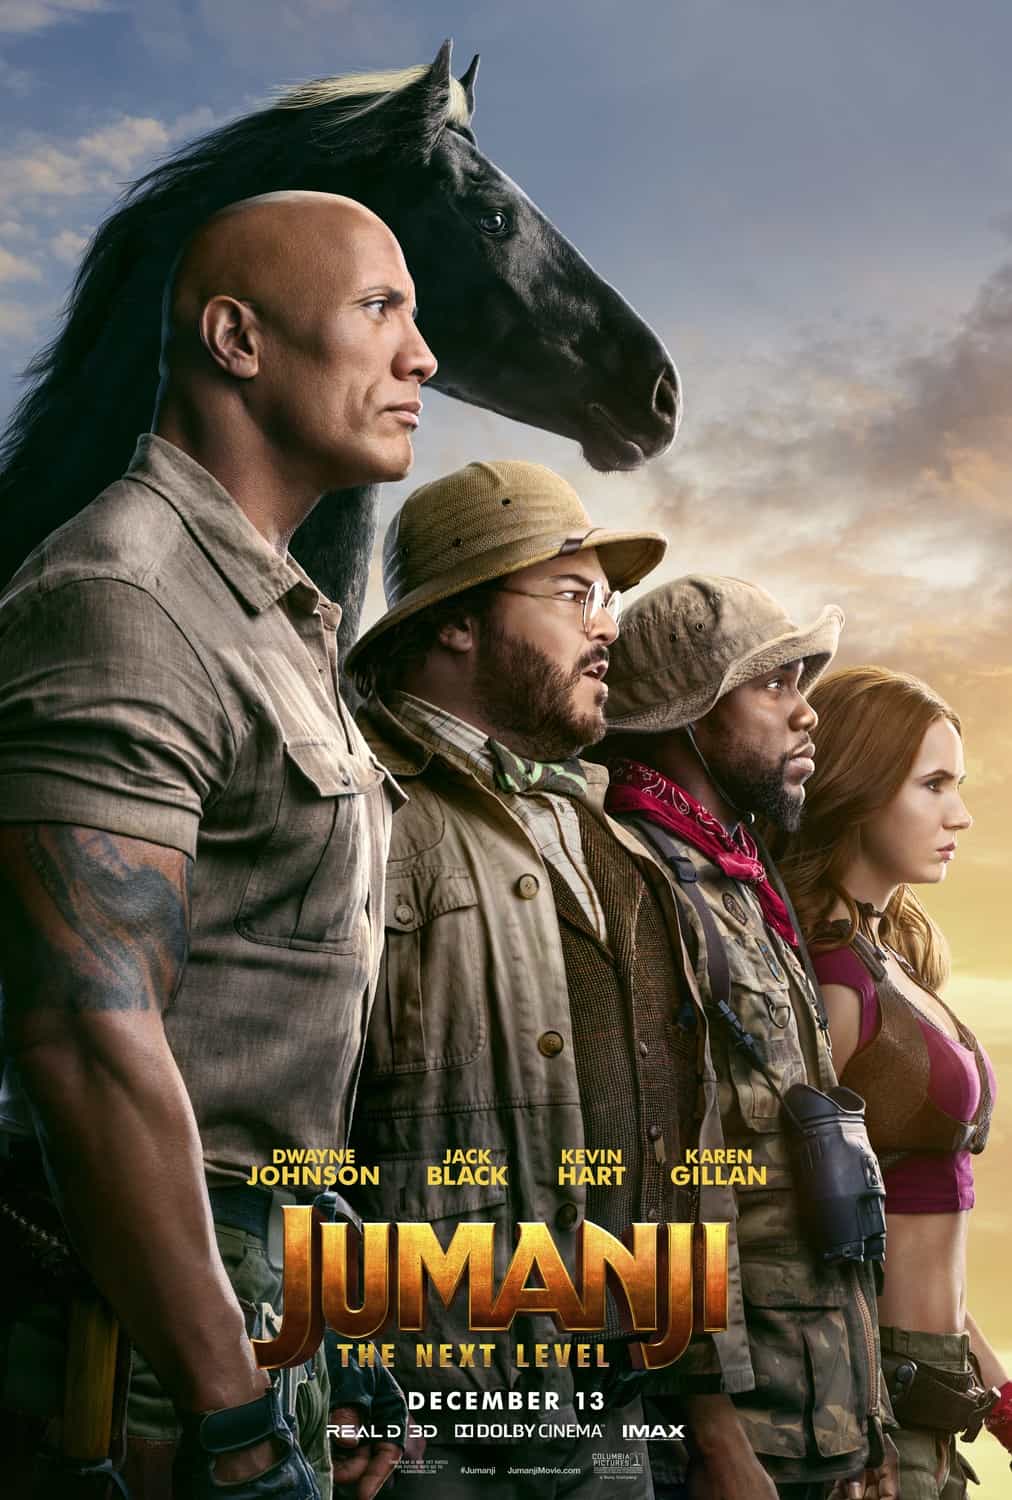 World Box Office Analysis 13th - 15th December 2019:  Jumanji goes to the top as its released wide while Sheep Without A Shepherd is the top new film